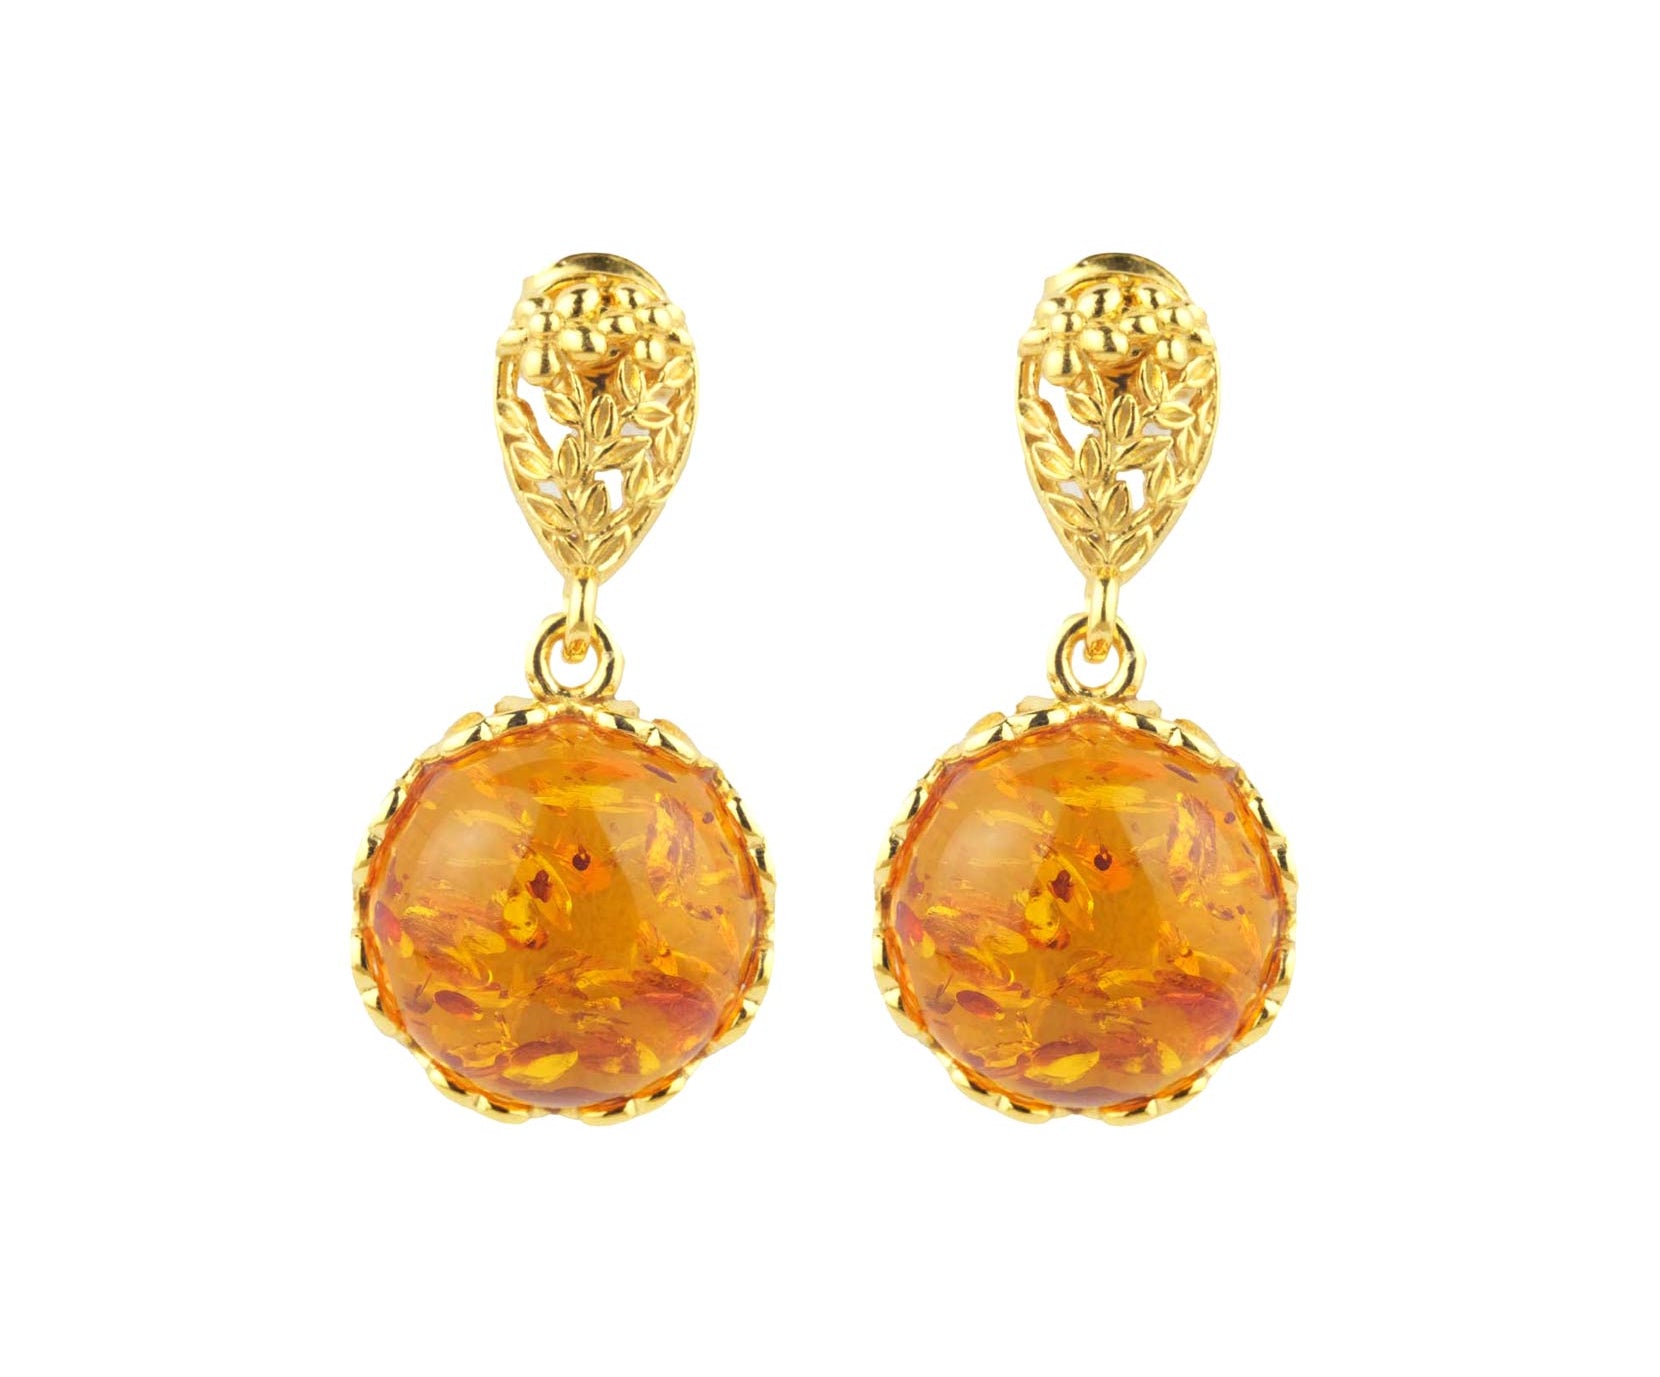 Amber Drop Earrings with Gold Floral Accent - Baltic Beauty